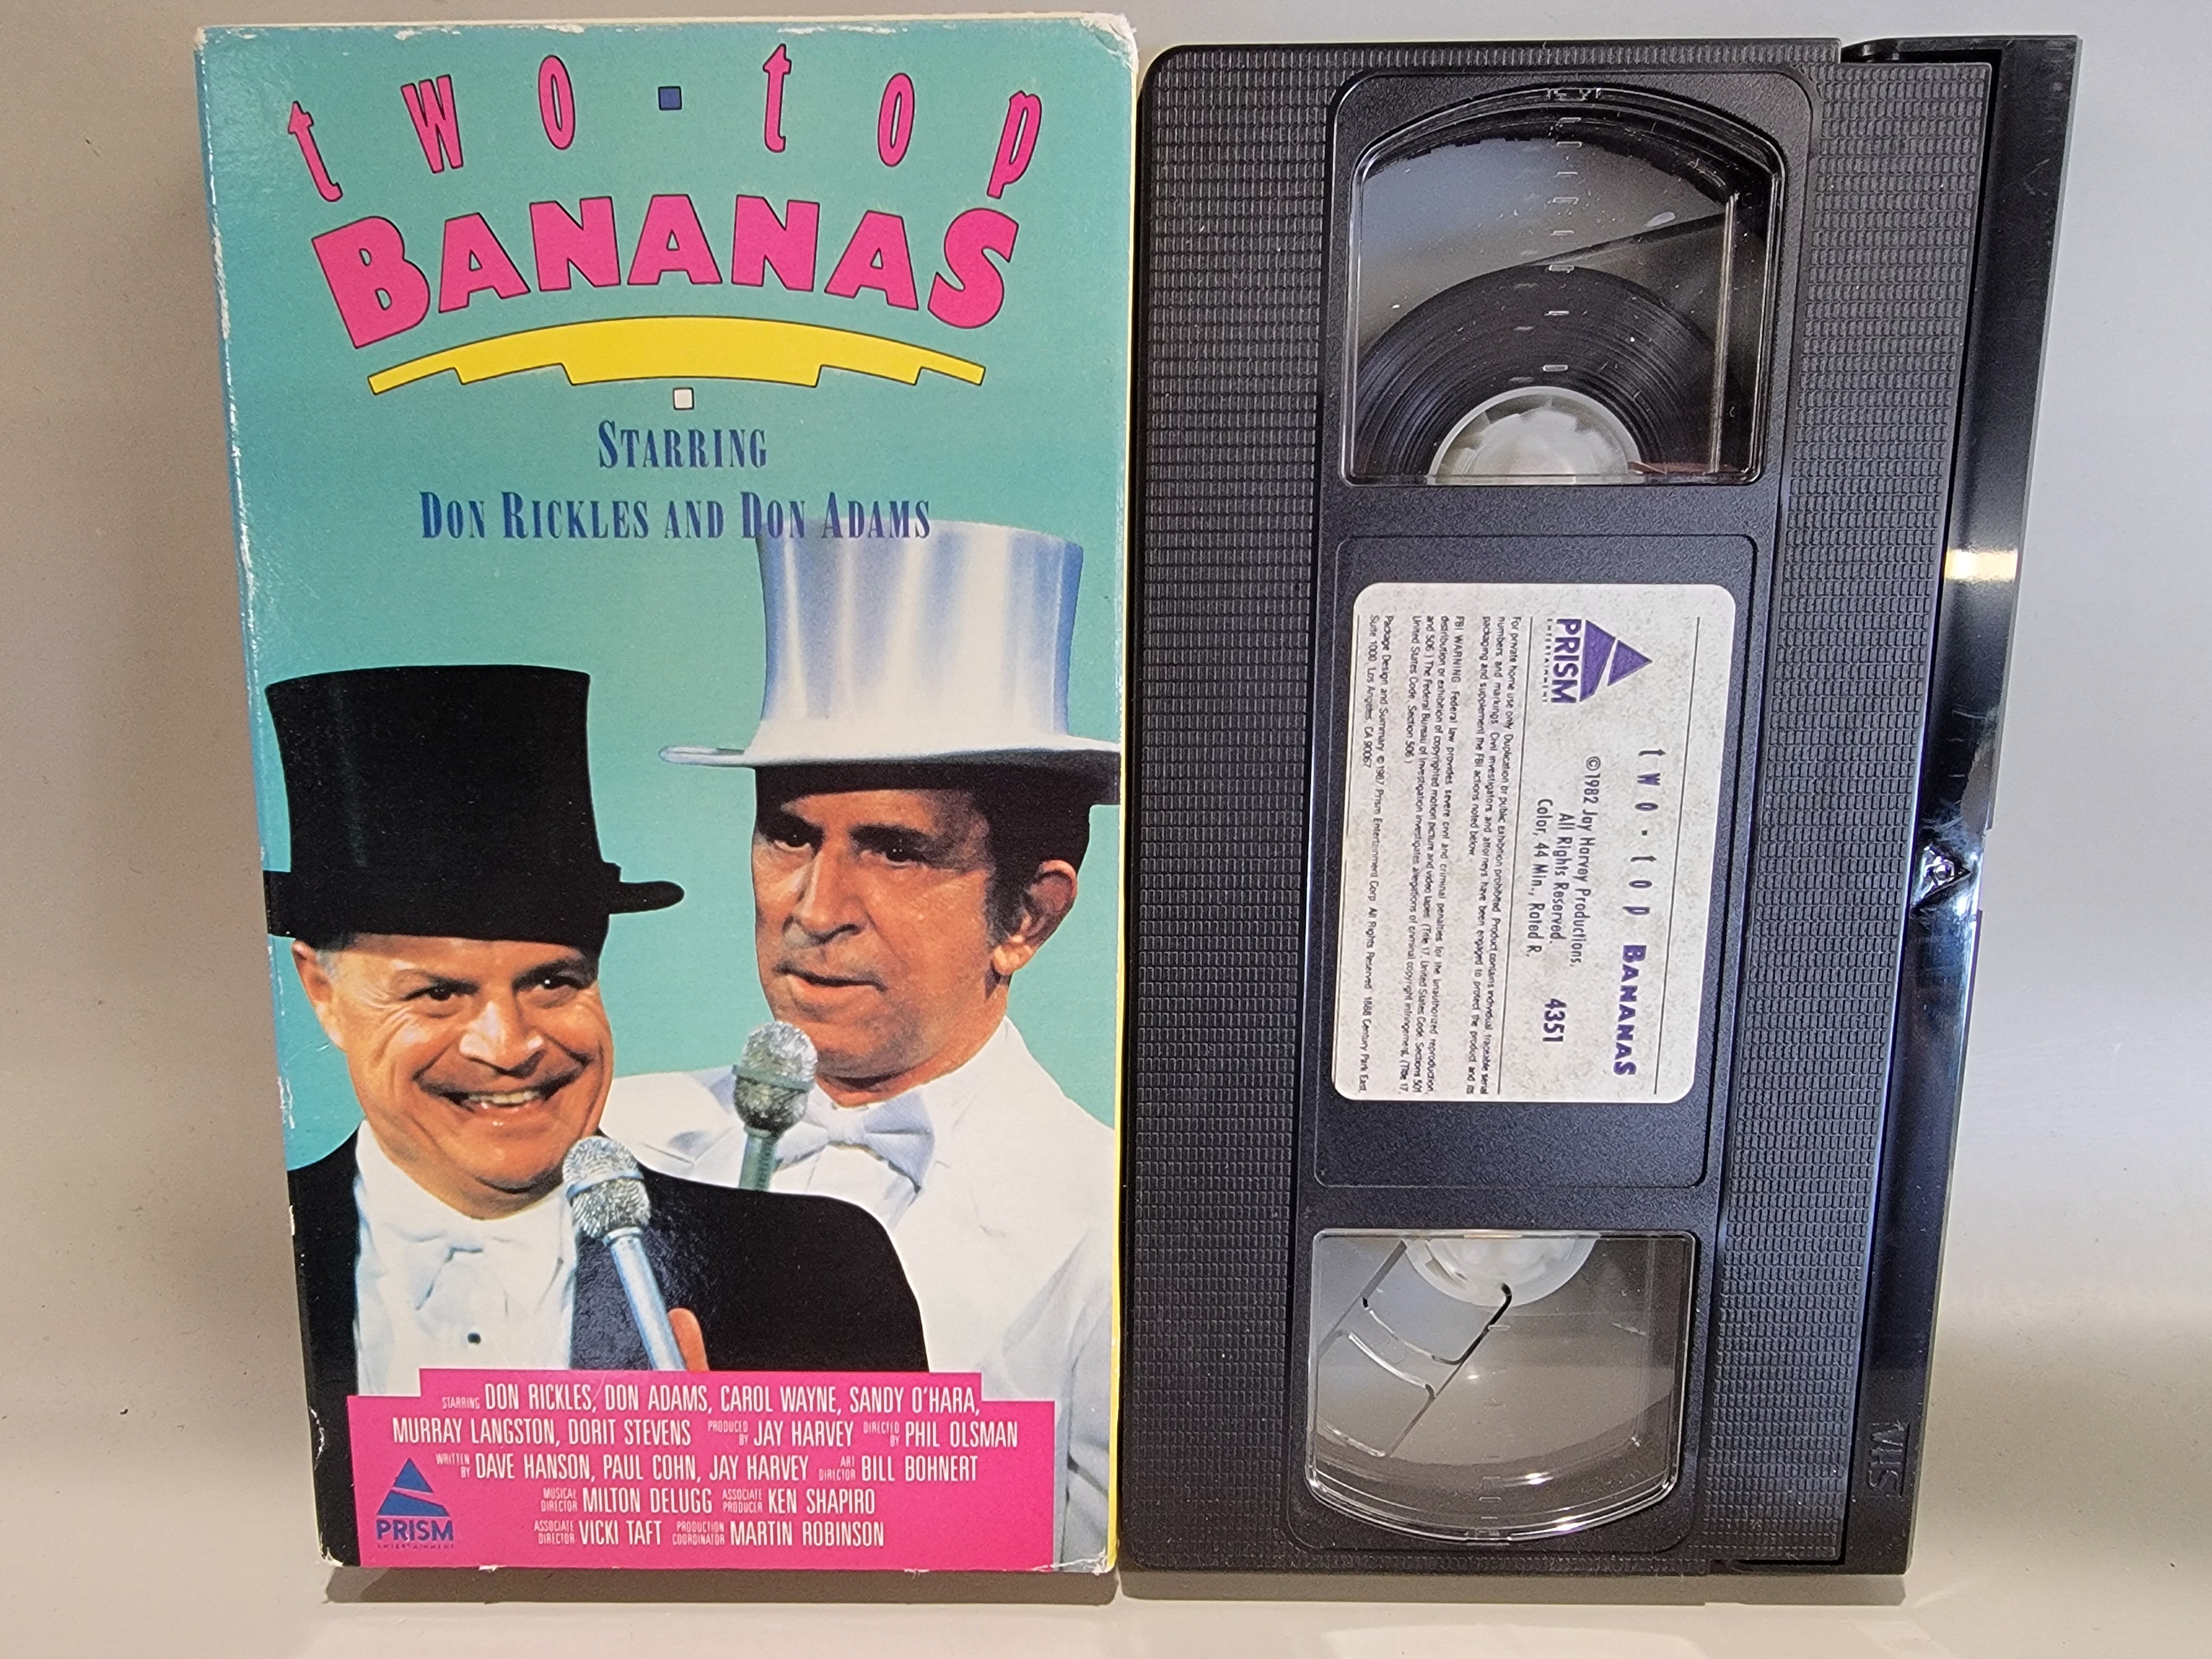 TWO TOP BANANAS VHS [USED]